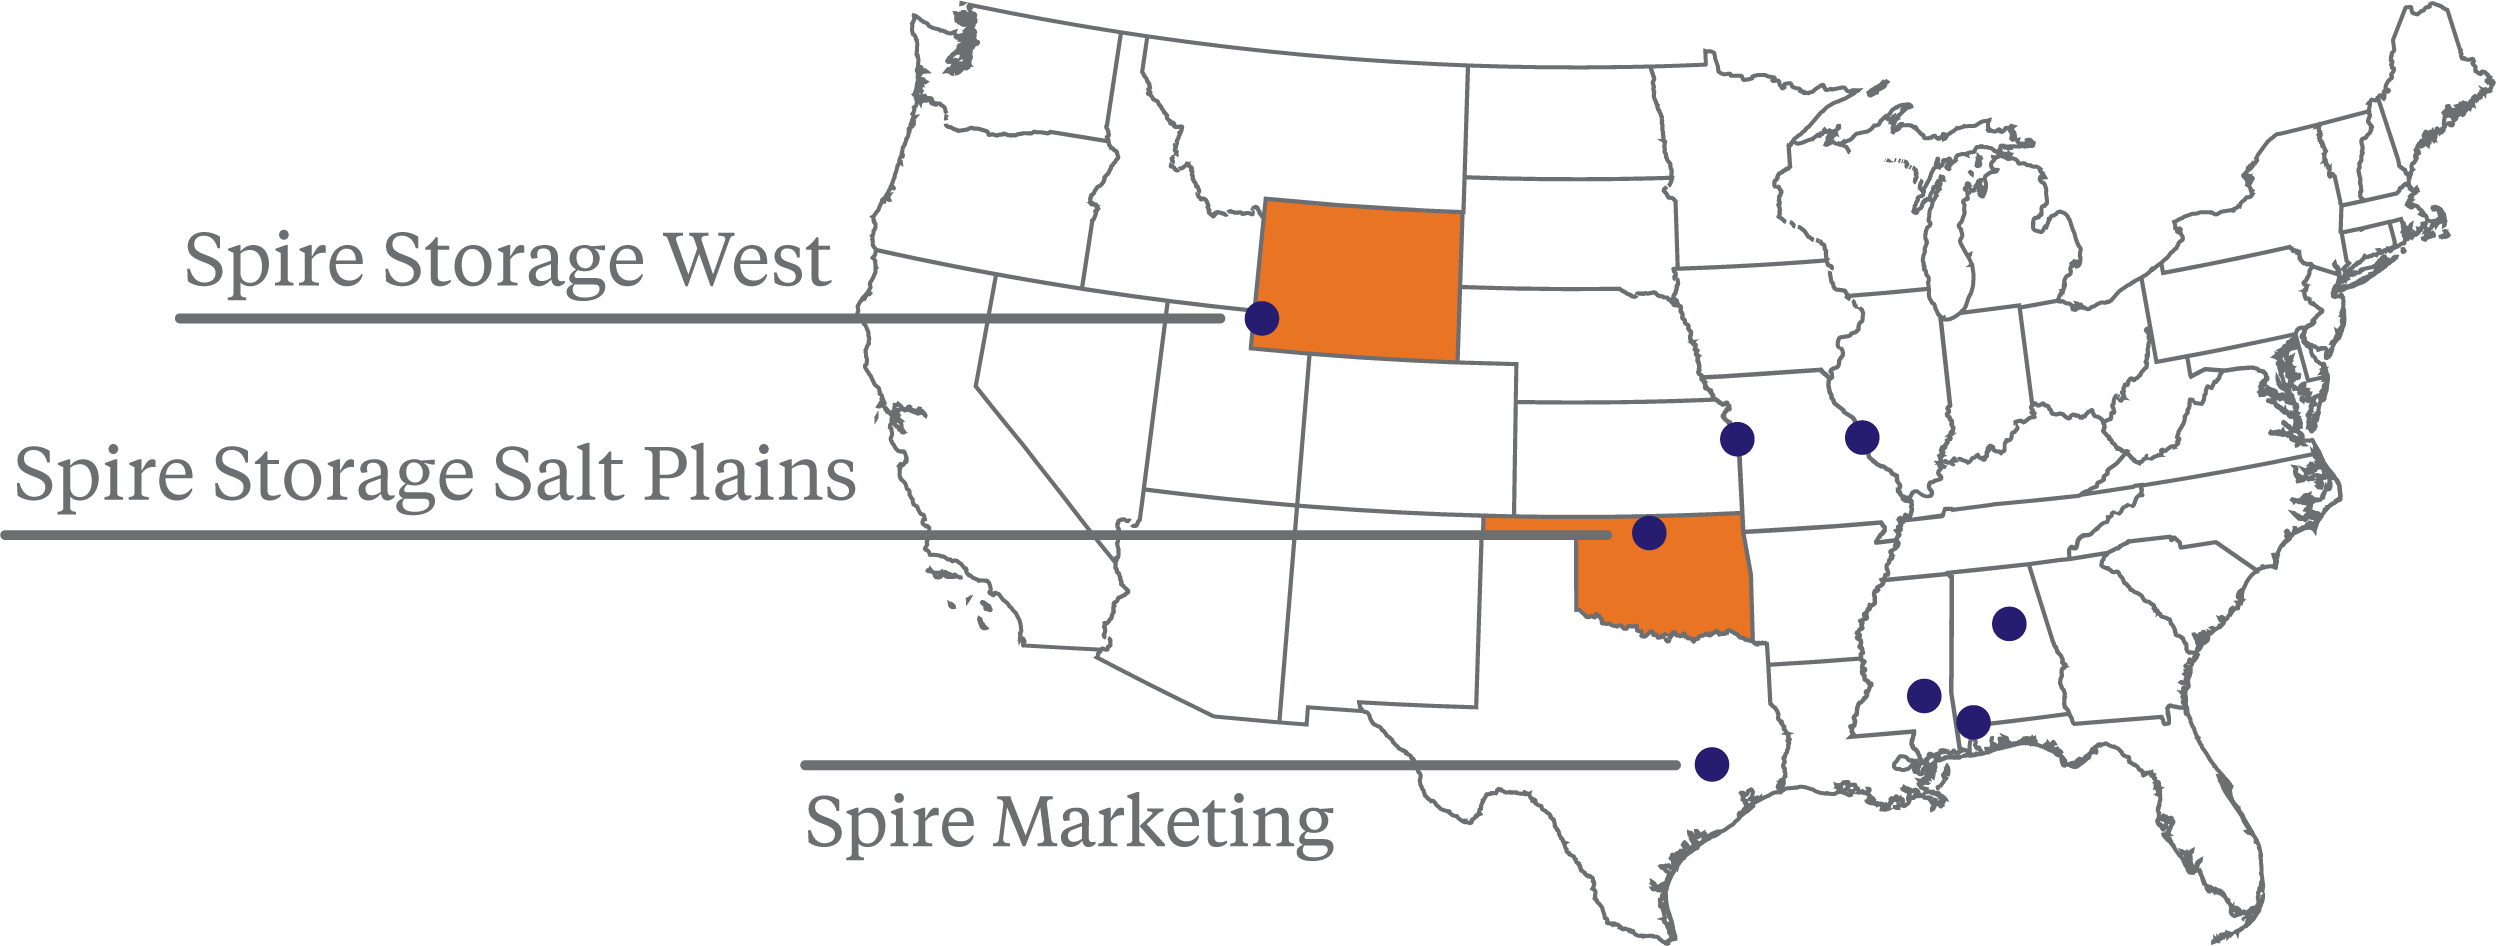 This is an image of a map of the United States. The states Wyoming and Utah are filled in with orange to indicate where Spire Storage's facilities are. There are also purple dots on the map to indicate other places Spire does business.